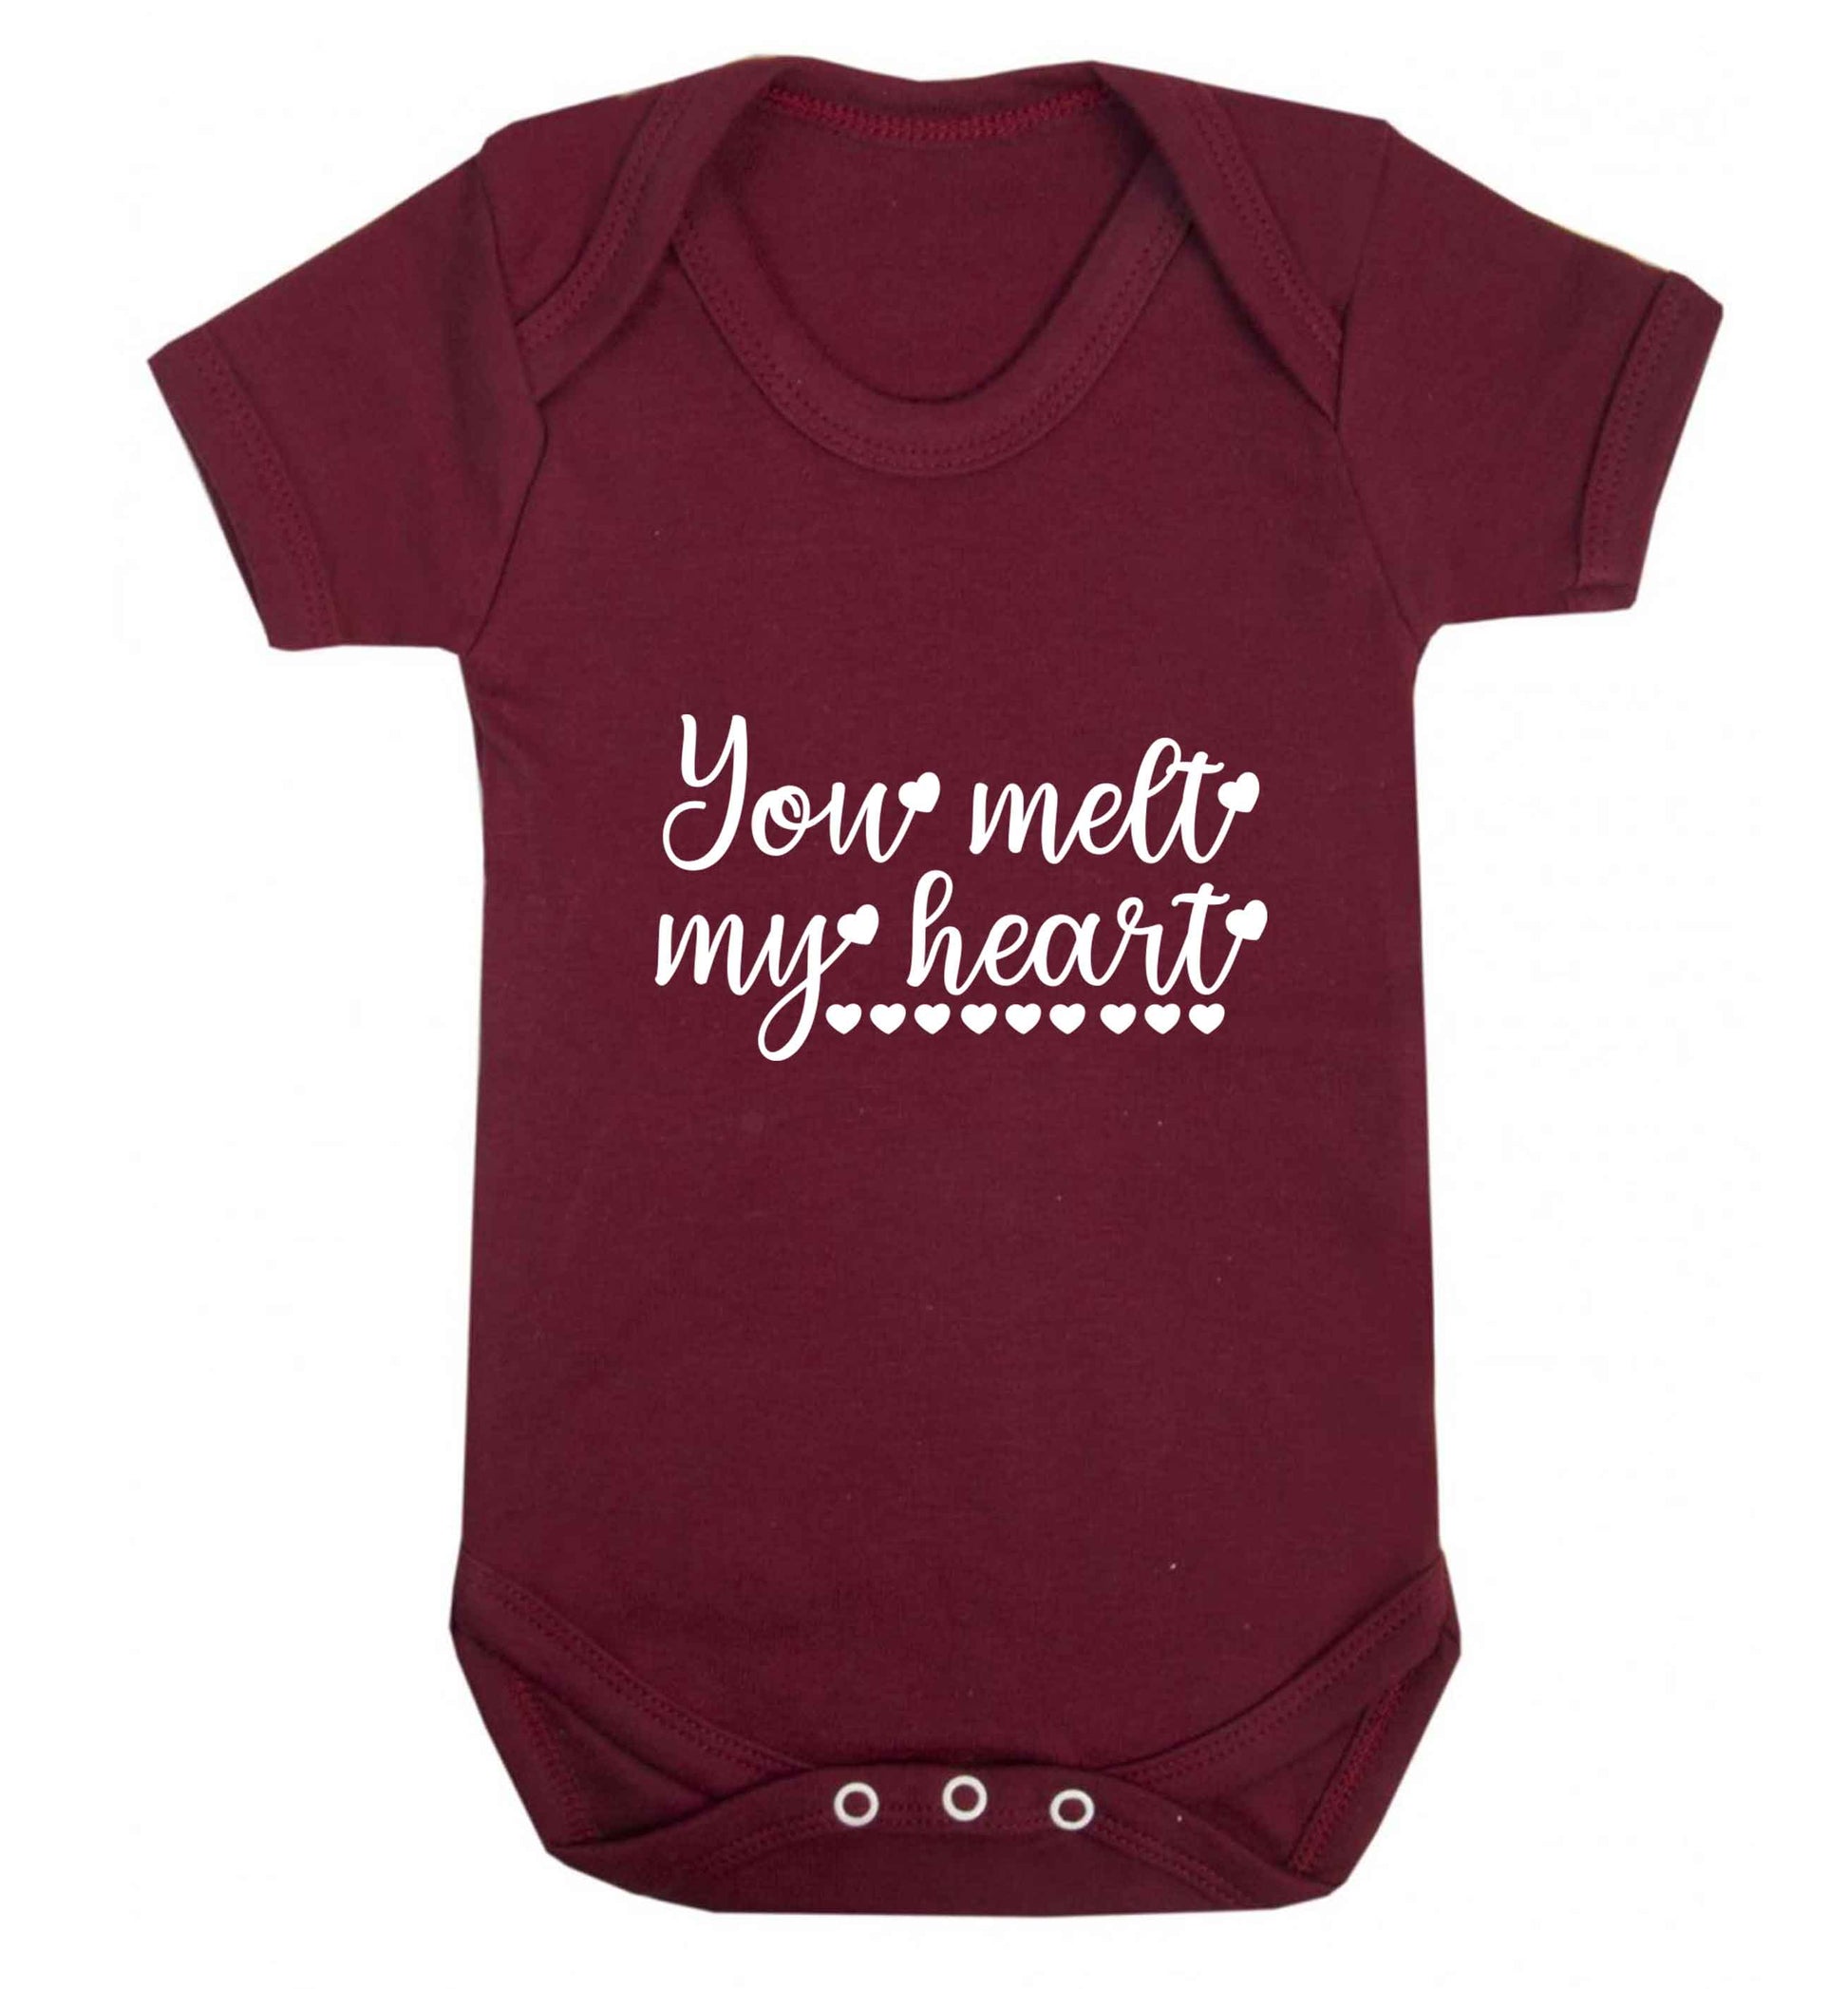 You melt my heart baby vest maroon 18-24 months